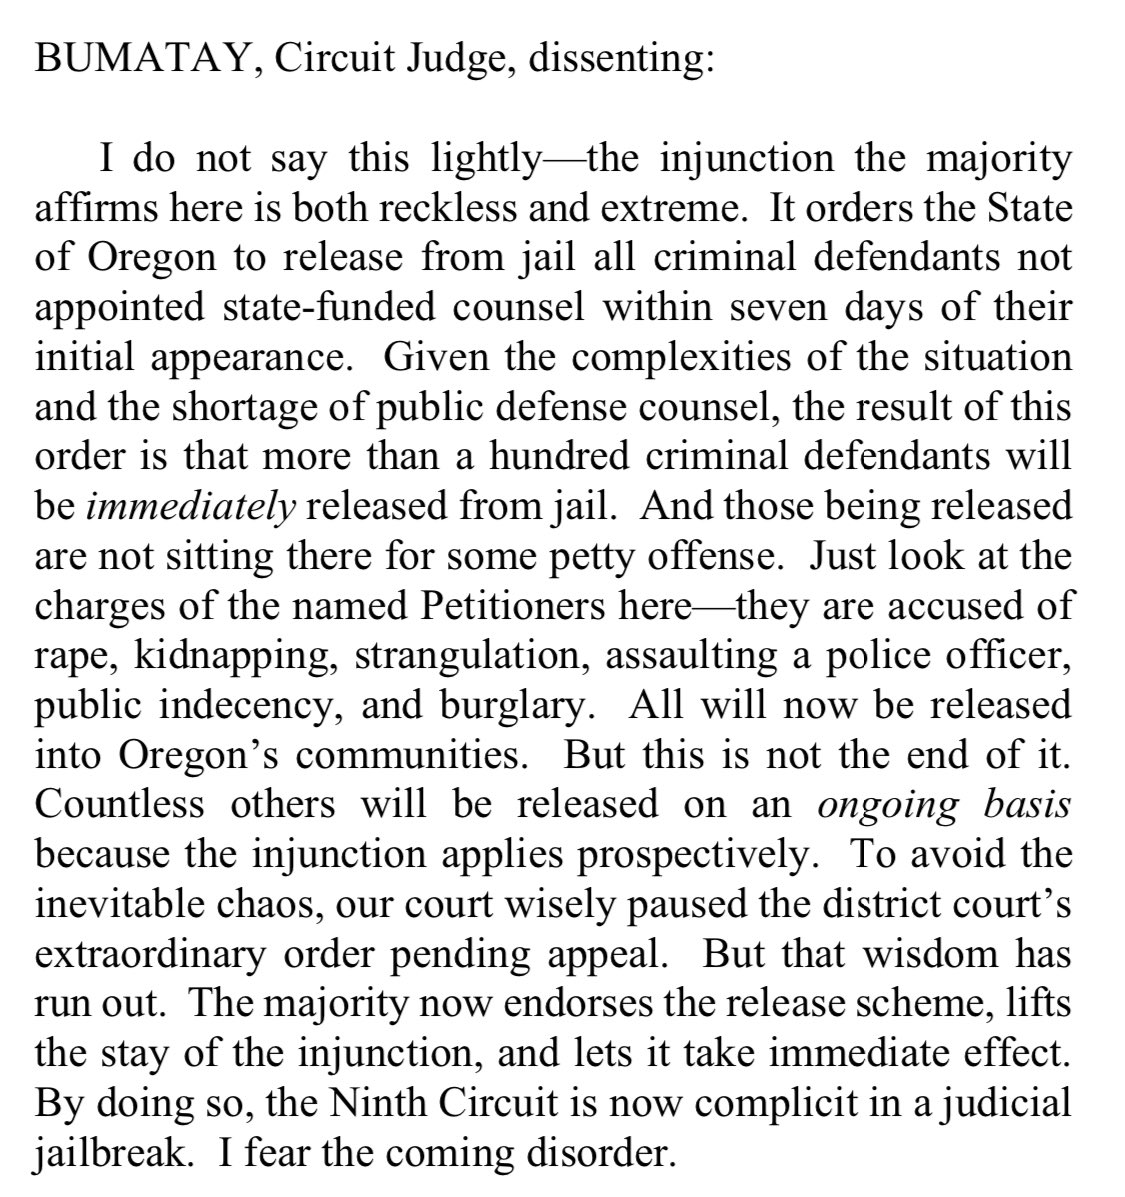 CA9 affirms lower court order that Oregon must release the state’s pretrial criminal defendants from jail if they’re not provided lawyers within 7 days. Obama, Biden judges in majority. Trump judge dissents, calls the injunction a “judicial jailbreak.” cdn.ca9.uscourts.gov/datastore/opin…